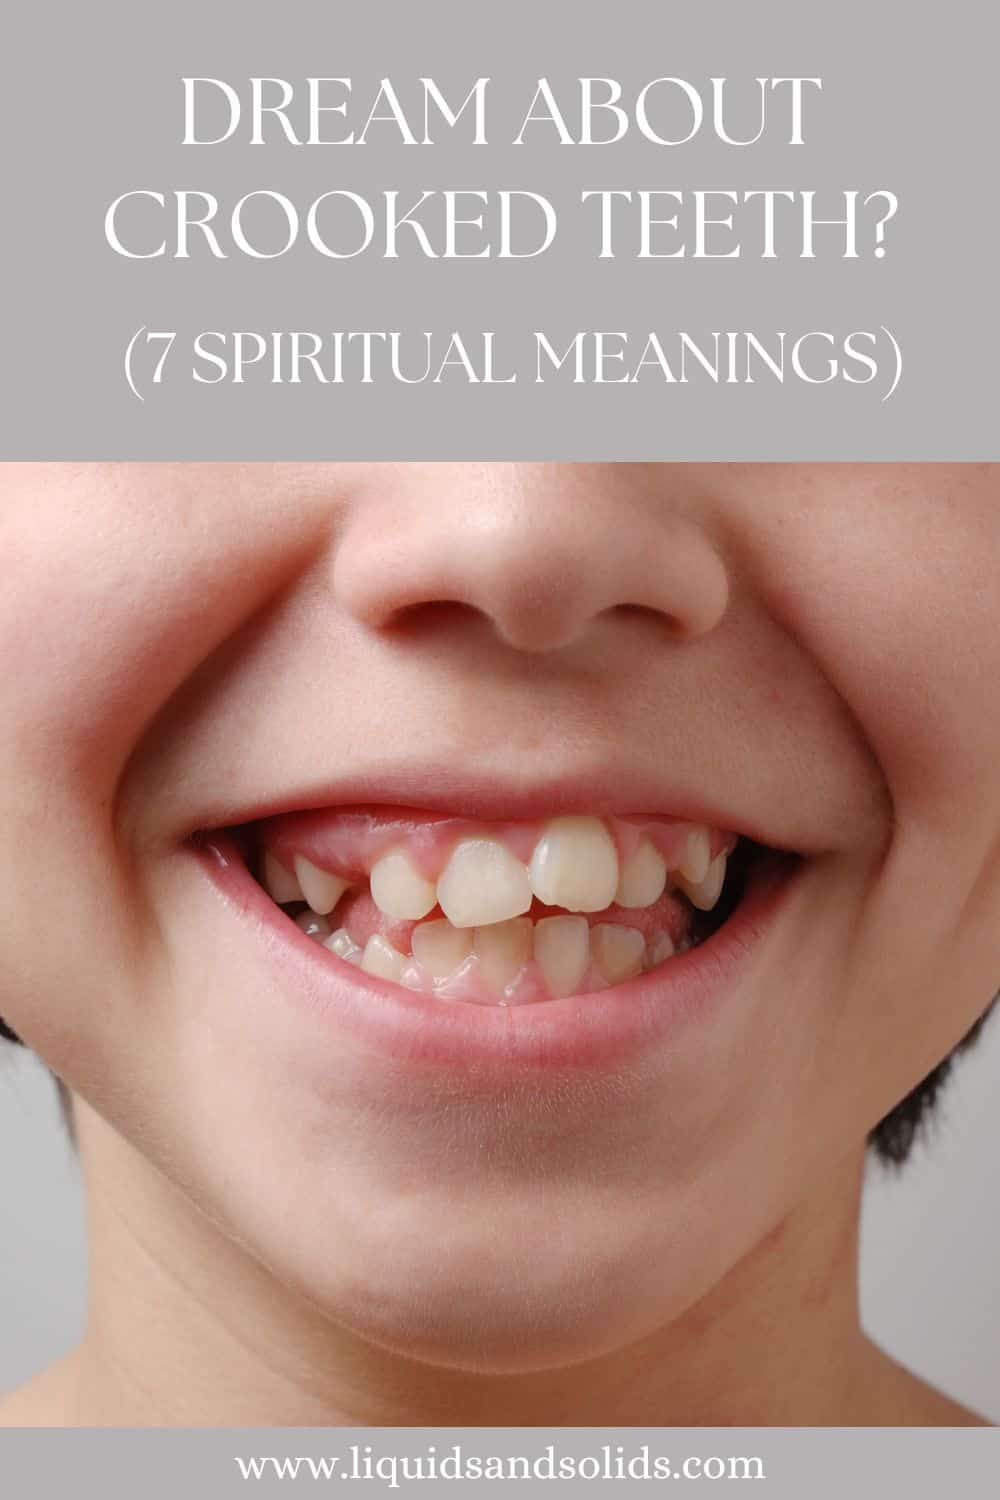 Dream About Crooked Teeth? (7 Spiritual Meanings)